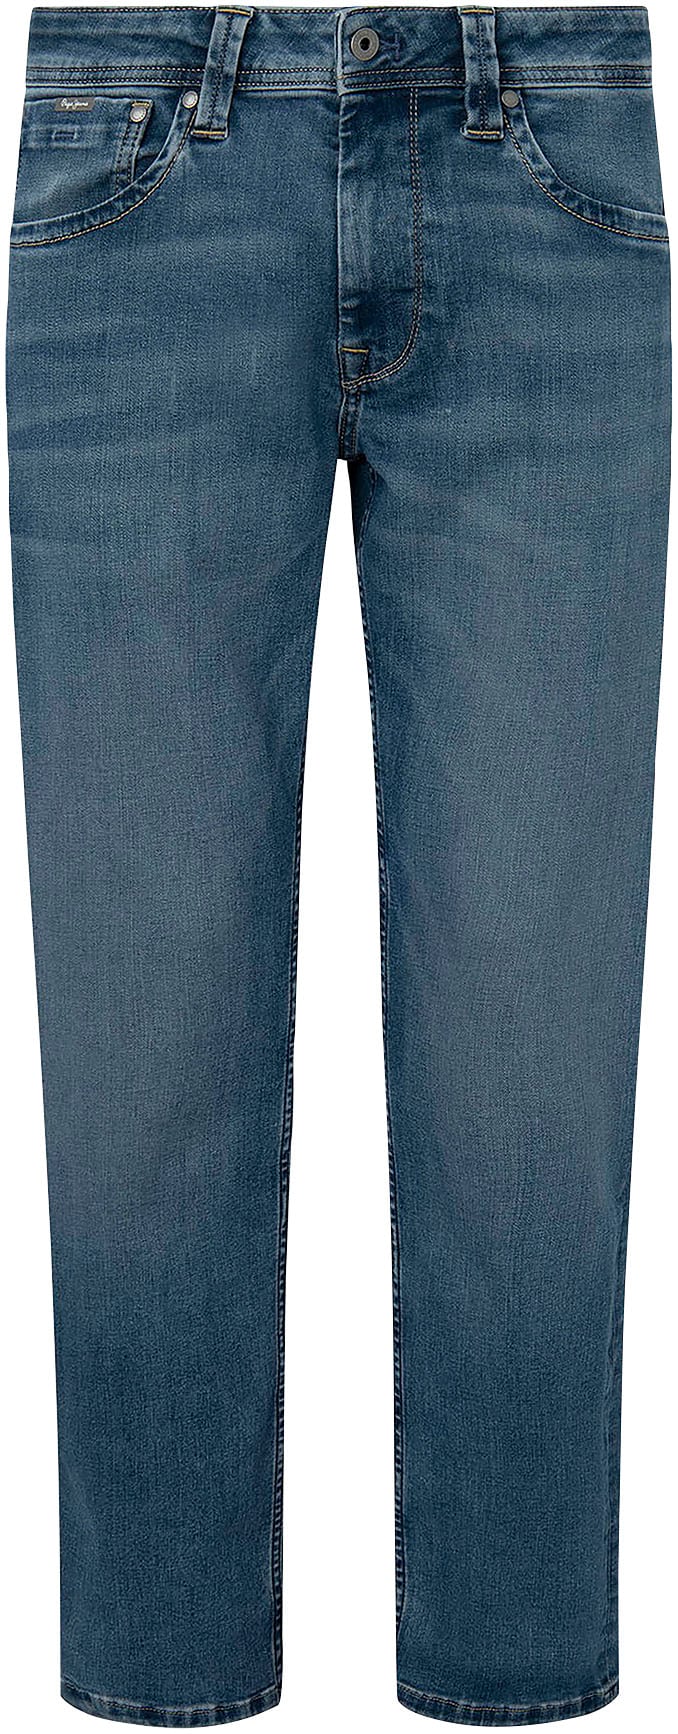 Pepe Jeans Straight-Jeans »KINGSTON ZIP«, in 5-Pocket-Form